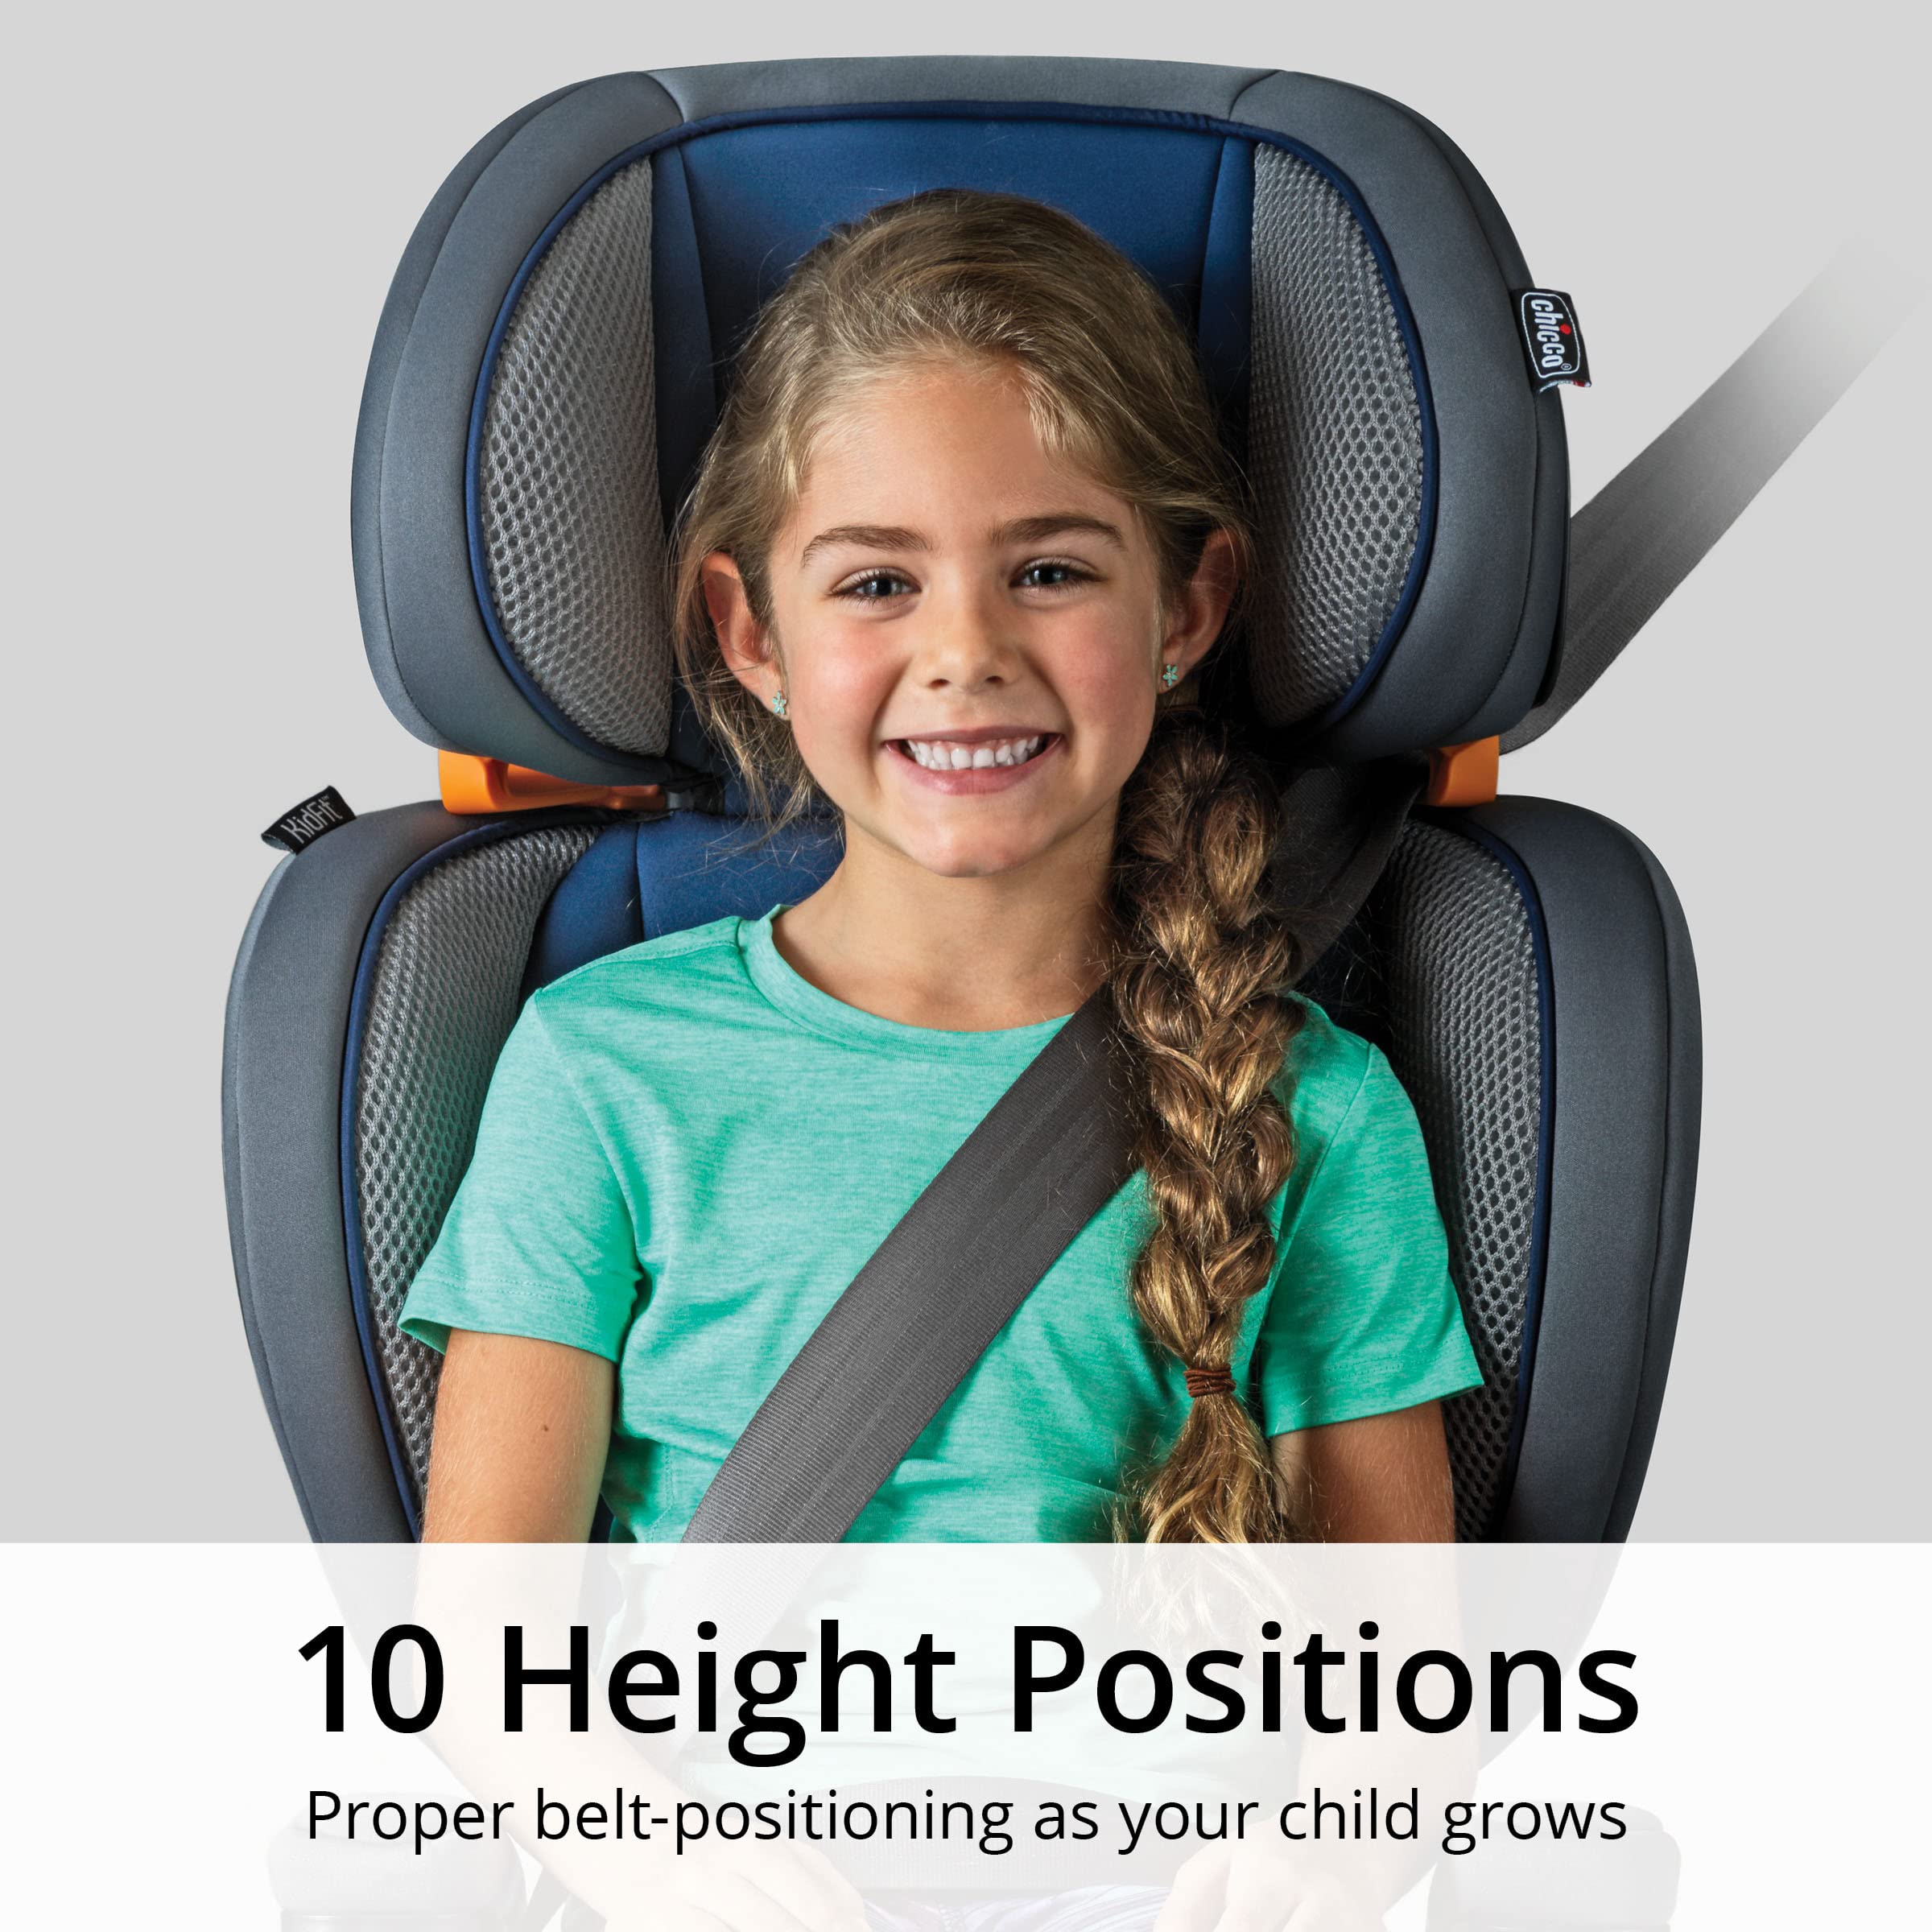 Chicco KidFit Adapt Plus 2-in-1 Belt-Positioning Booster Car Seat, Backless and High Back Booster Seat, for Children Aged 4 Years and up and 40-100 lbs. | Vapor/Grey